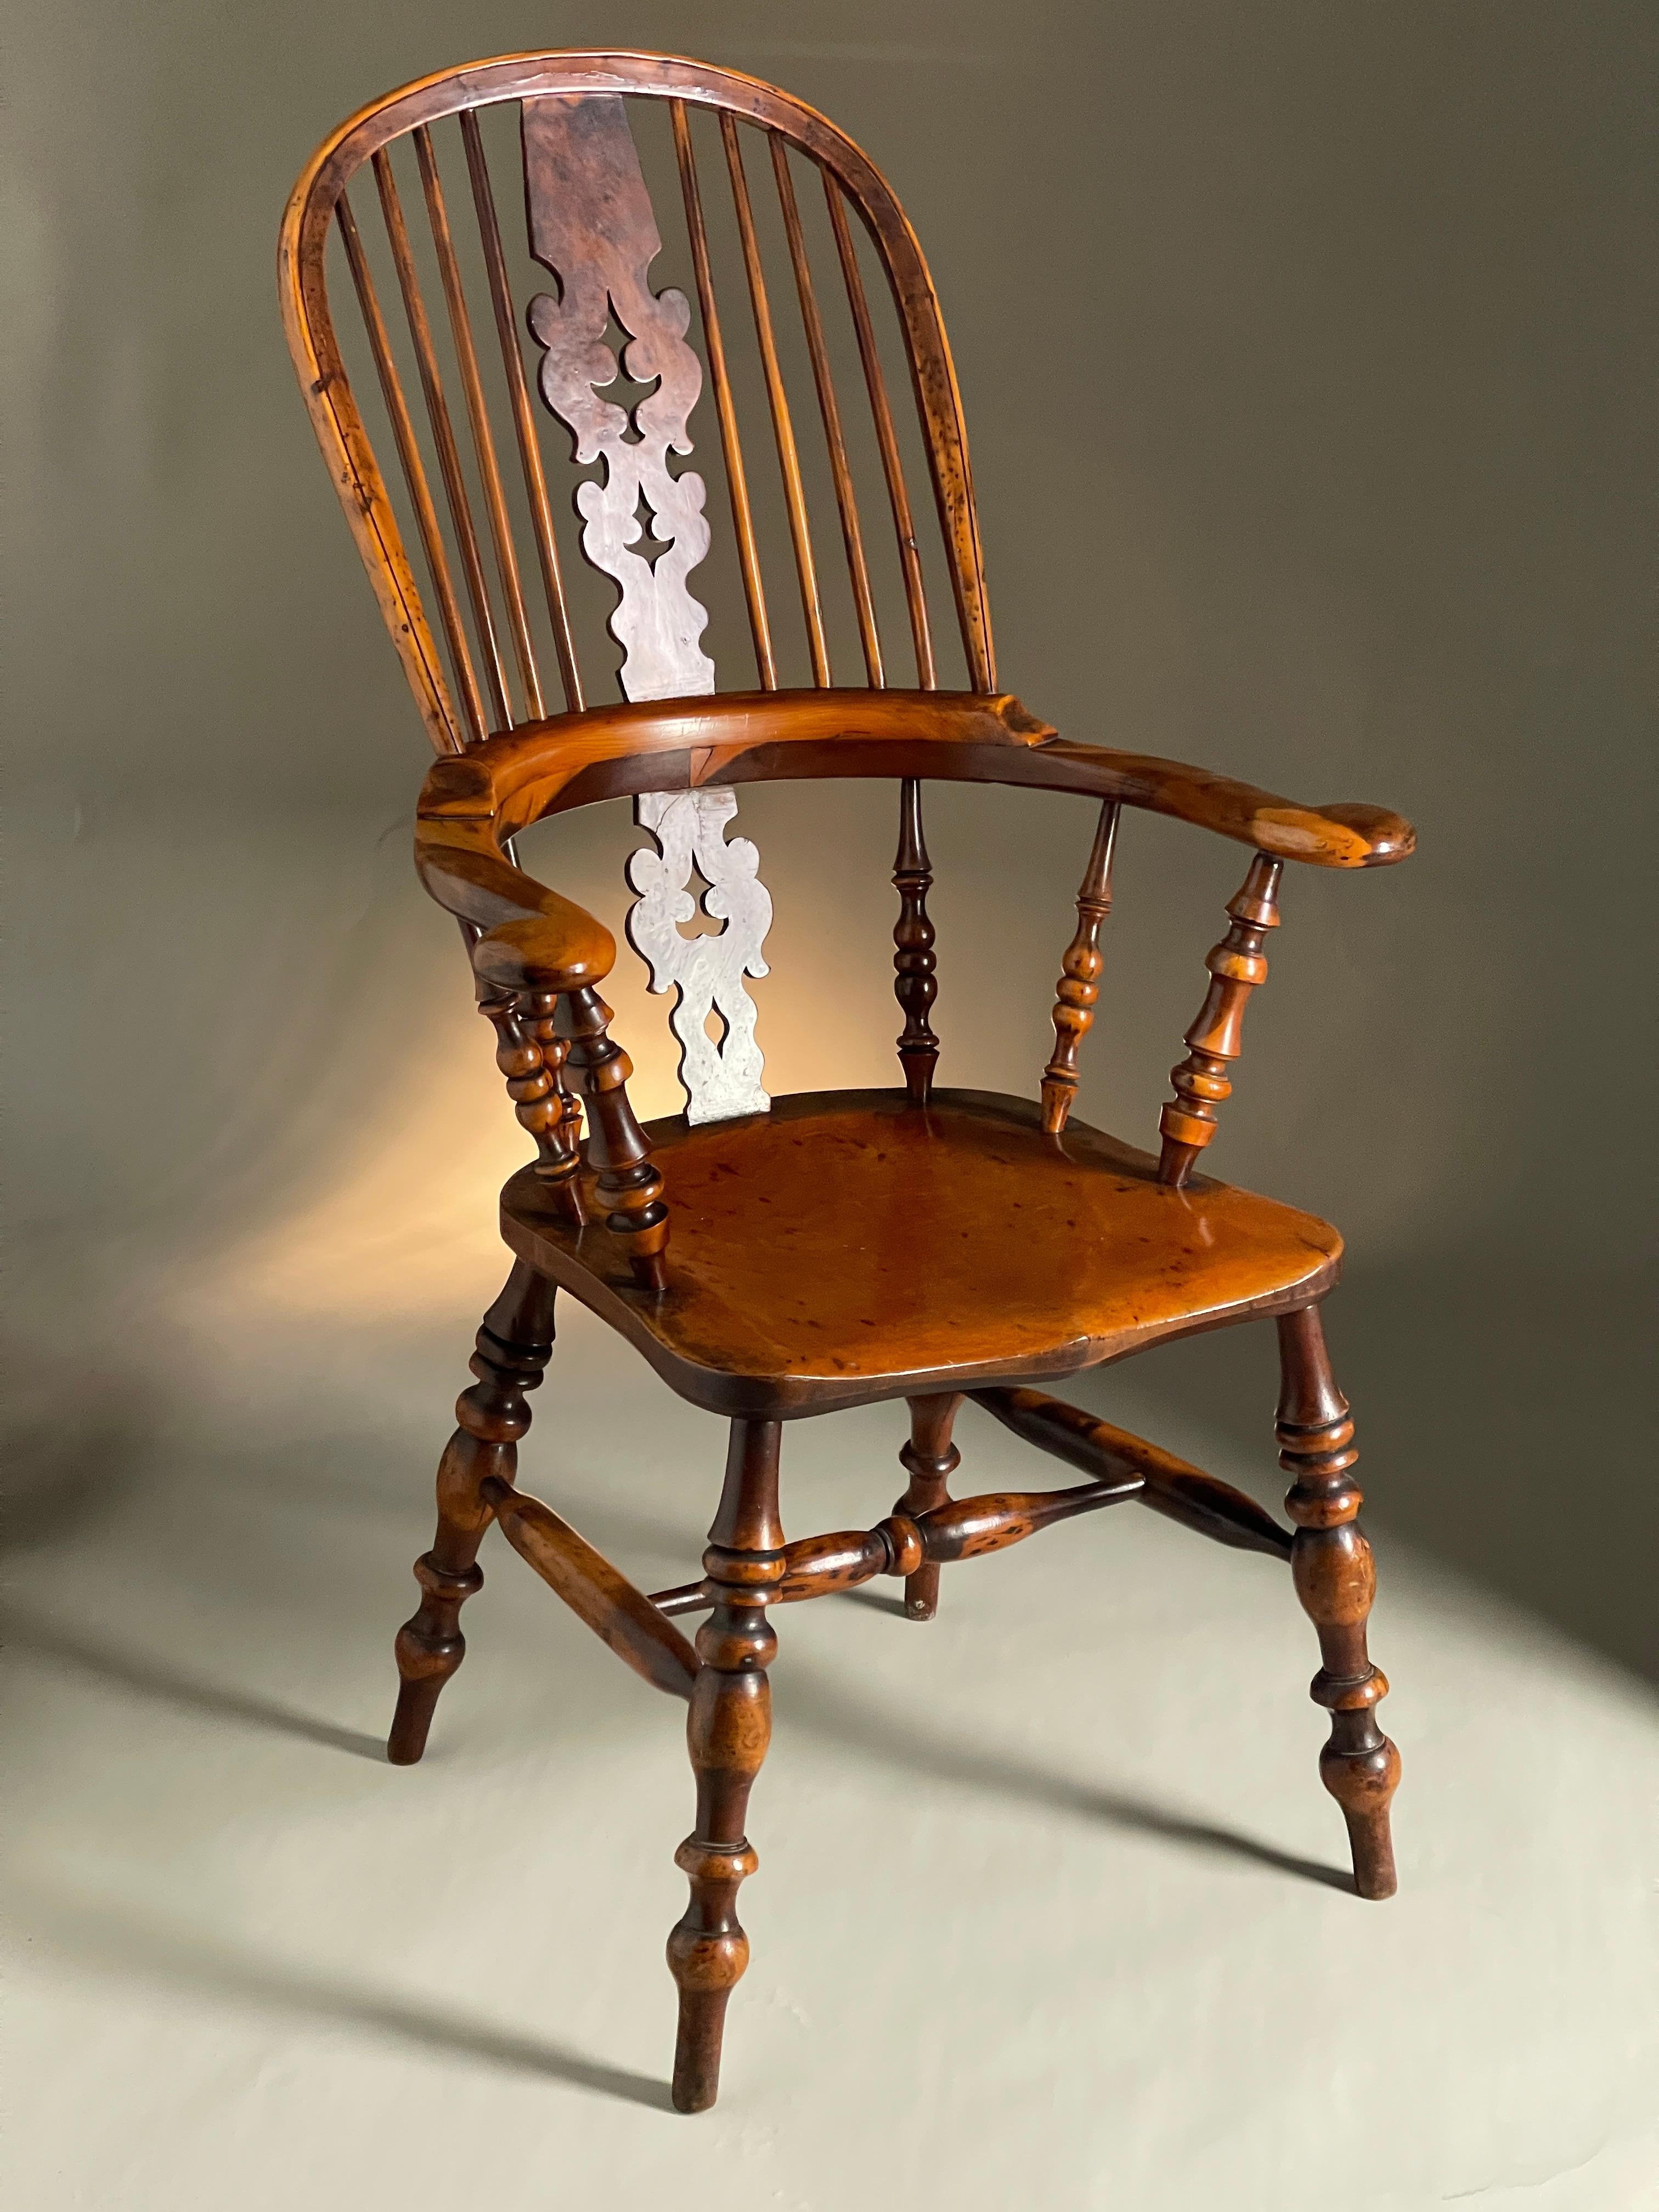 Wonderful yew Windsor chair excellent colour and patination 19th century broad arm and burr splats. 
Size 115cms high 68cms wide 57cms deep

